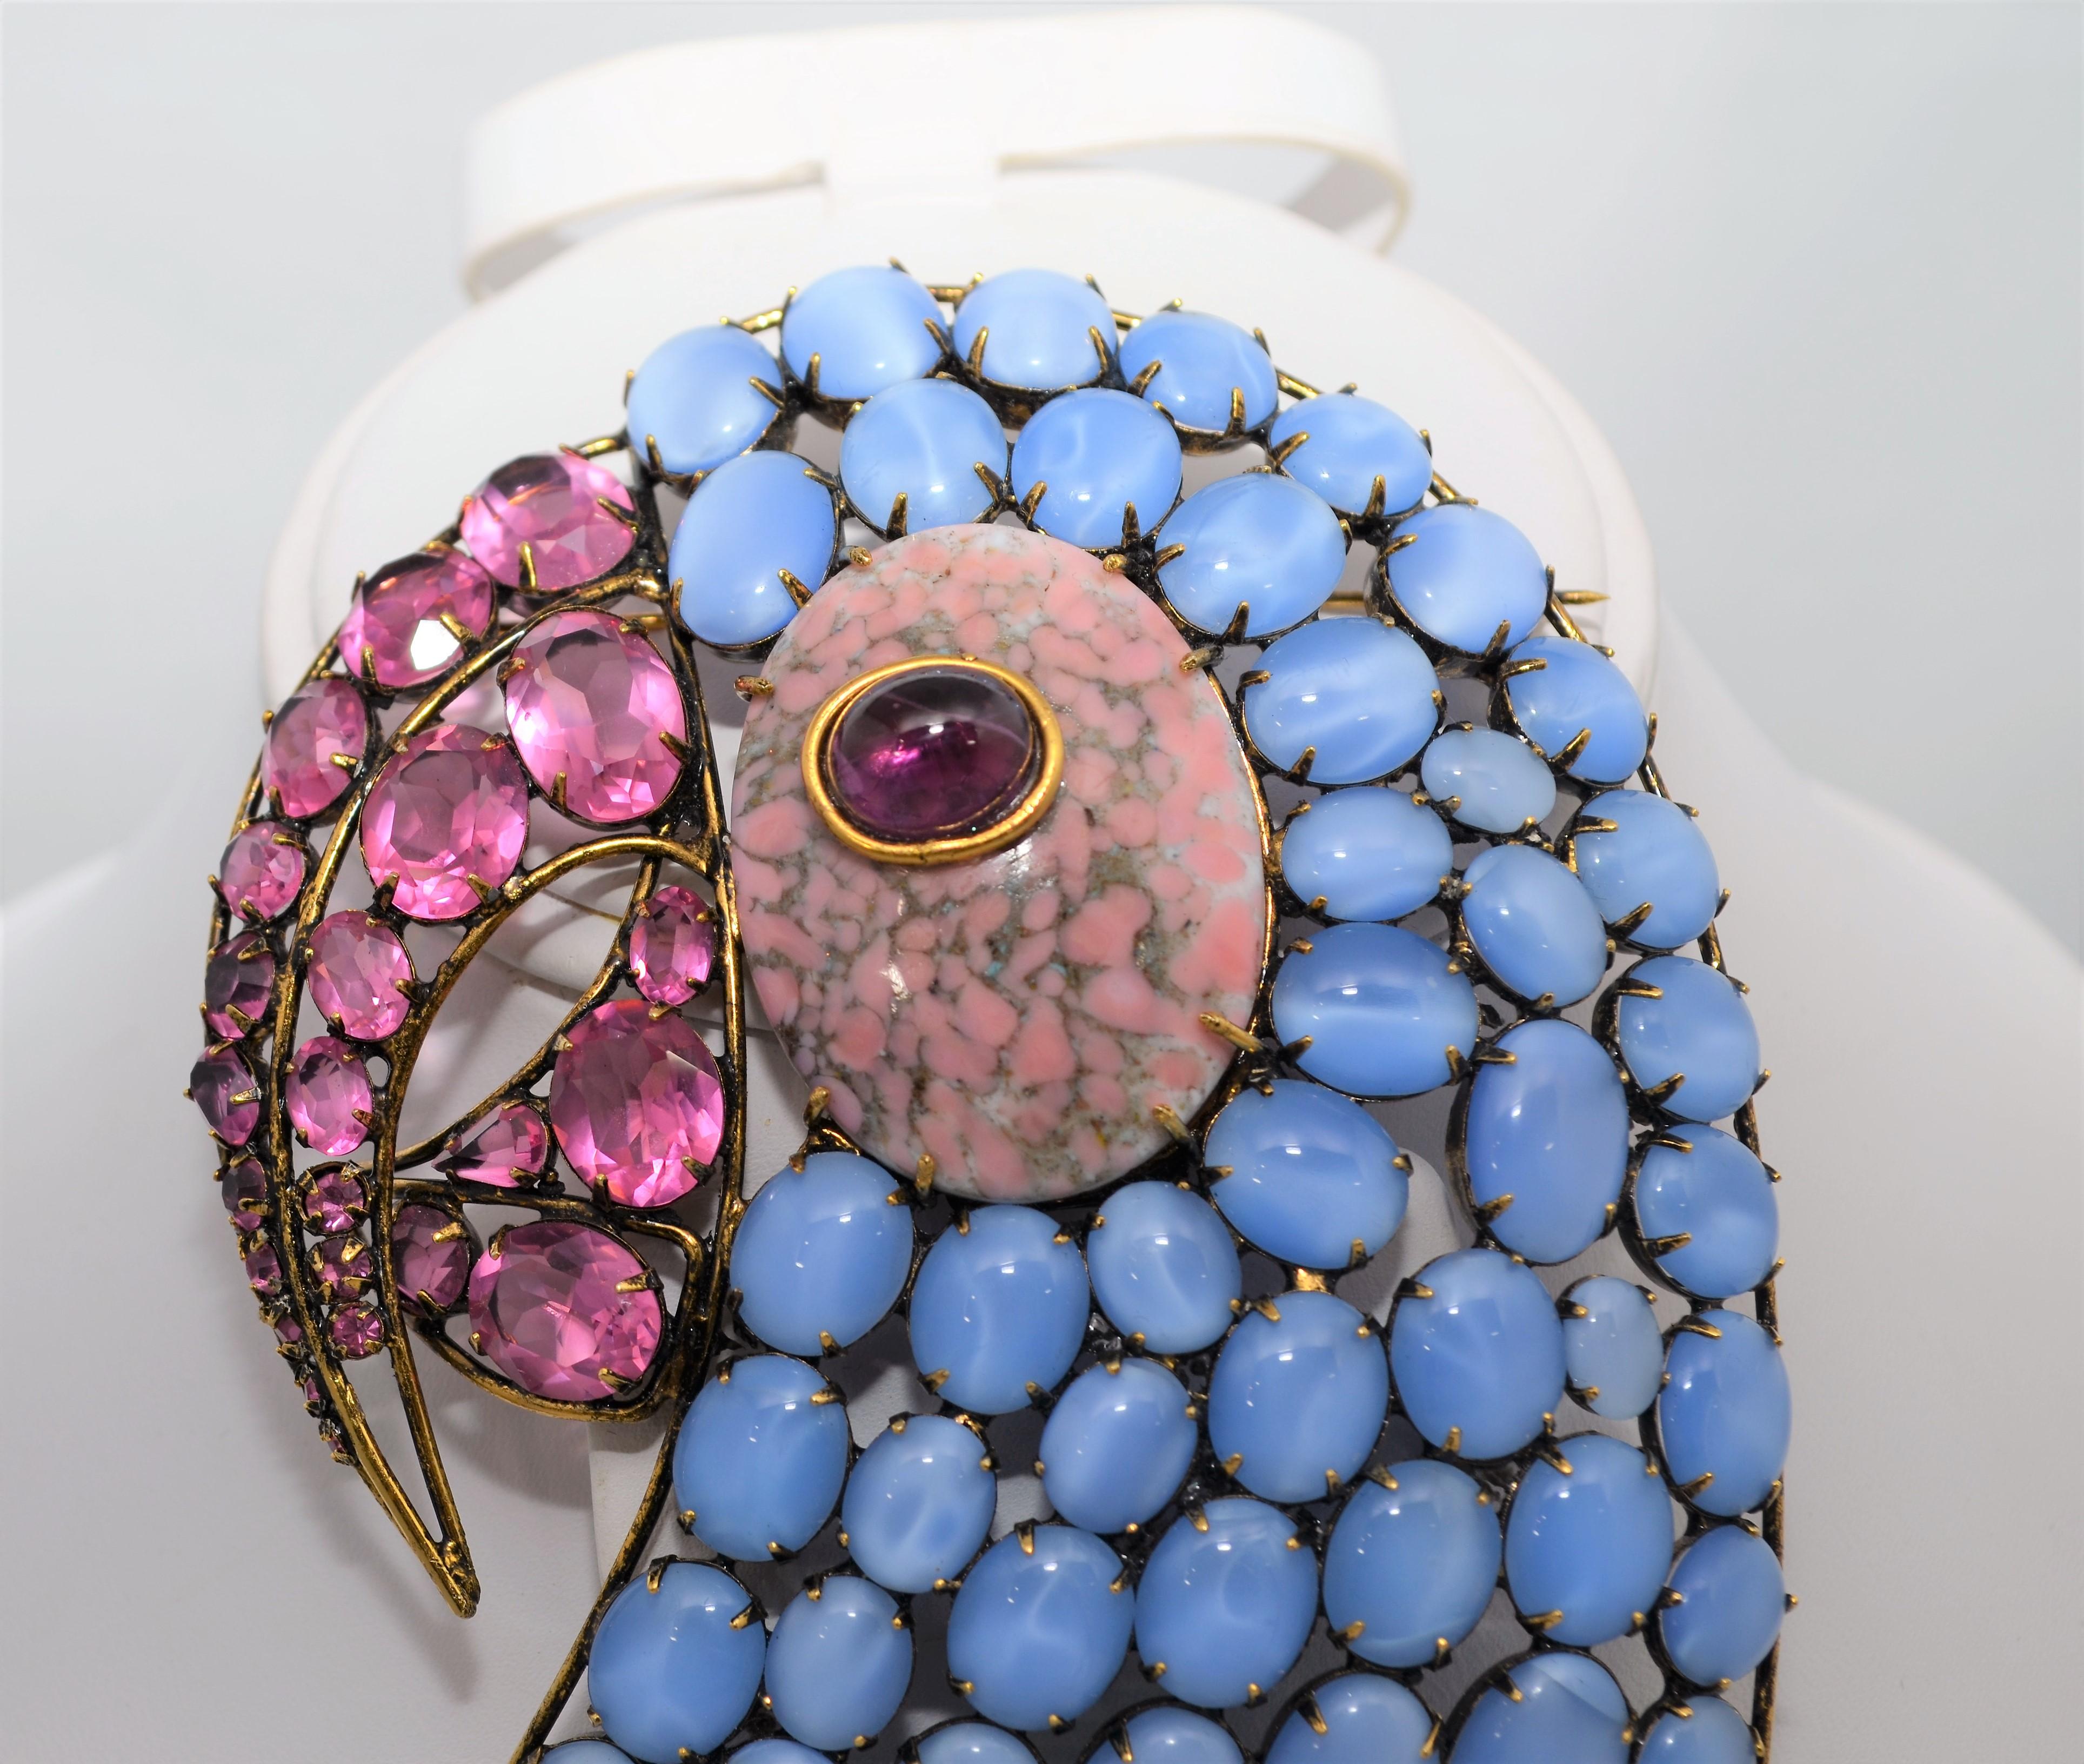 Iradj Moini brooch delicately handmade featuring multi-colored stones on a 18k gold-plated brass and is signed at the back. Each gem was handset and chosen from the finest provenance.

Brooch measurements: 4'' x 5'' In pristine condition with no